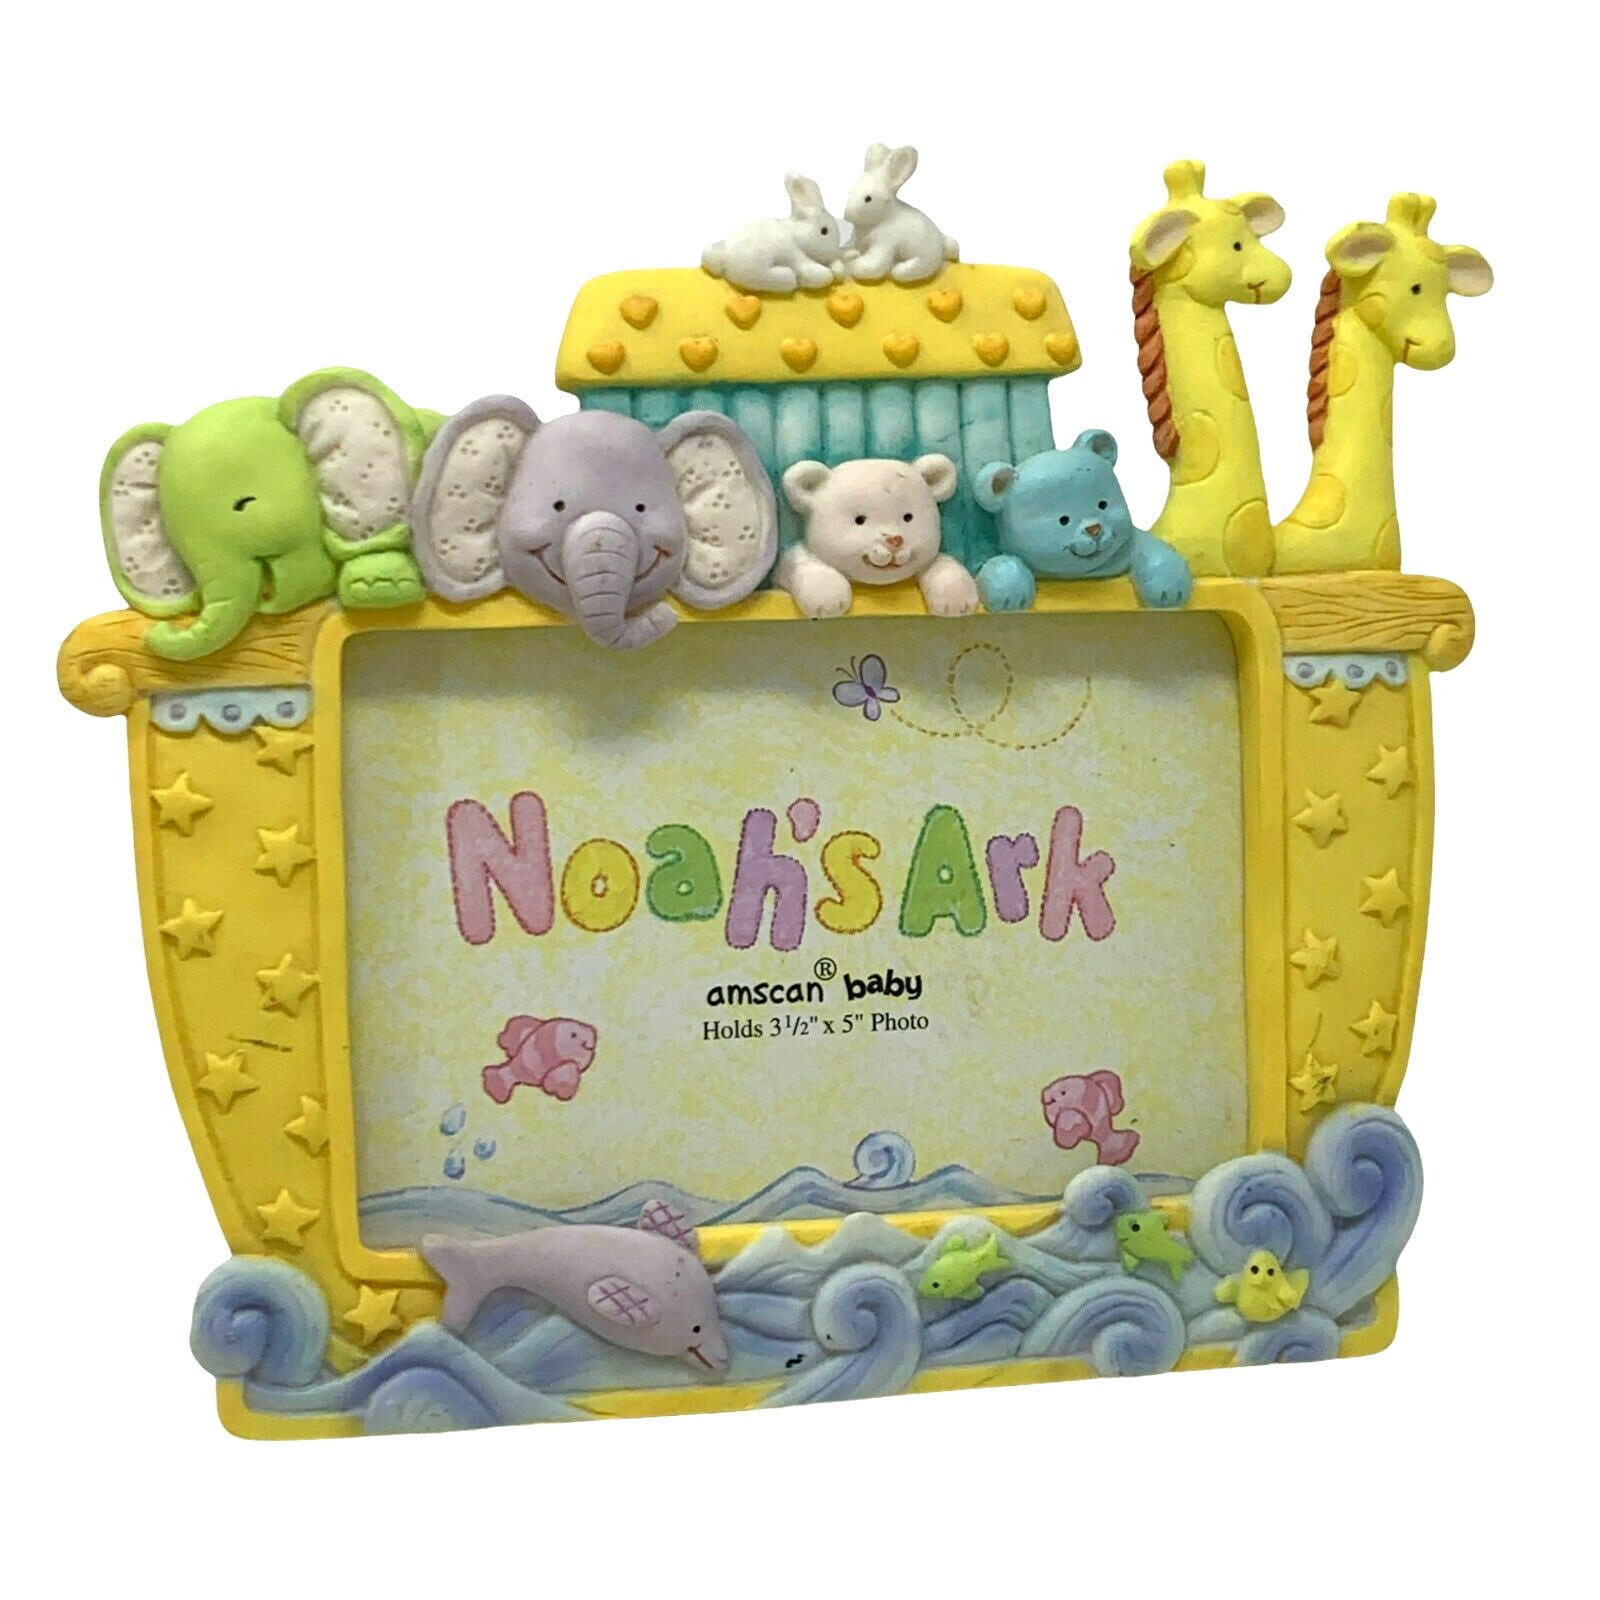 AMSCAN BABY Noah's Ark Picture Frame 3.5